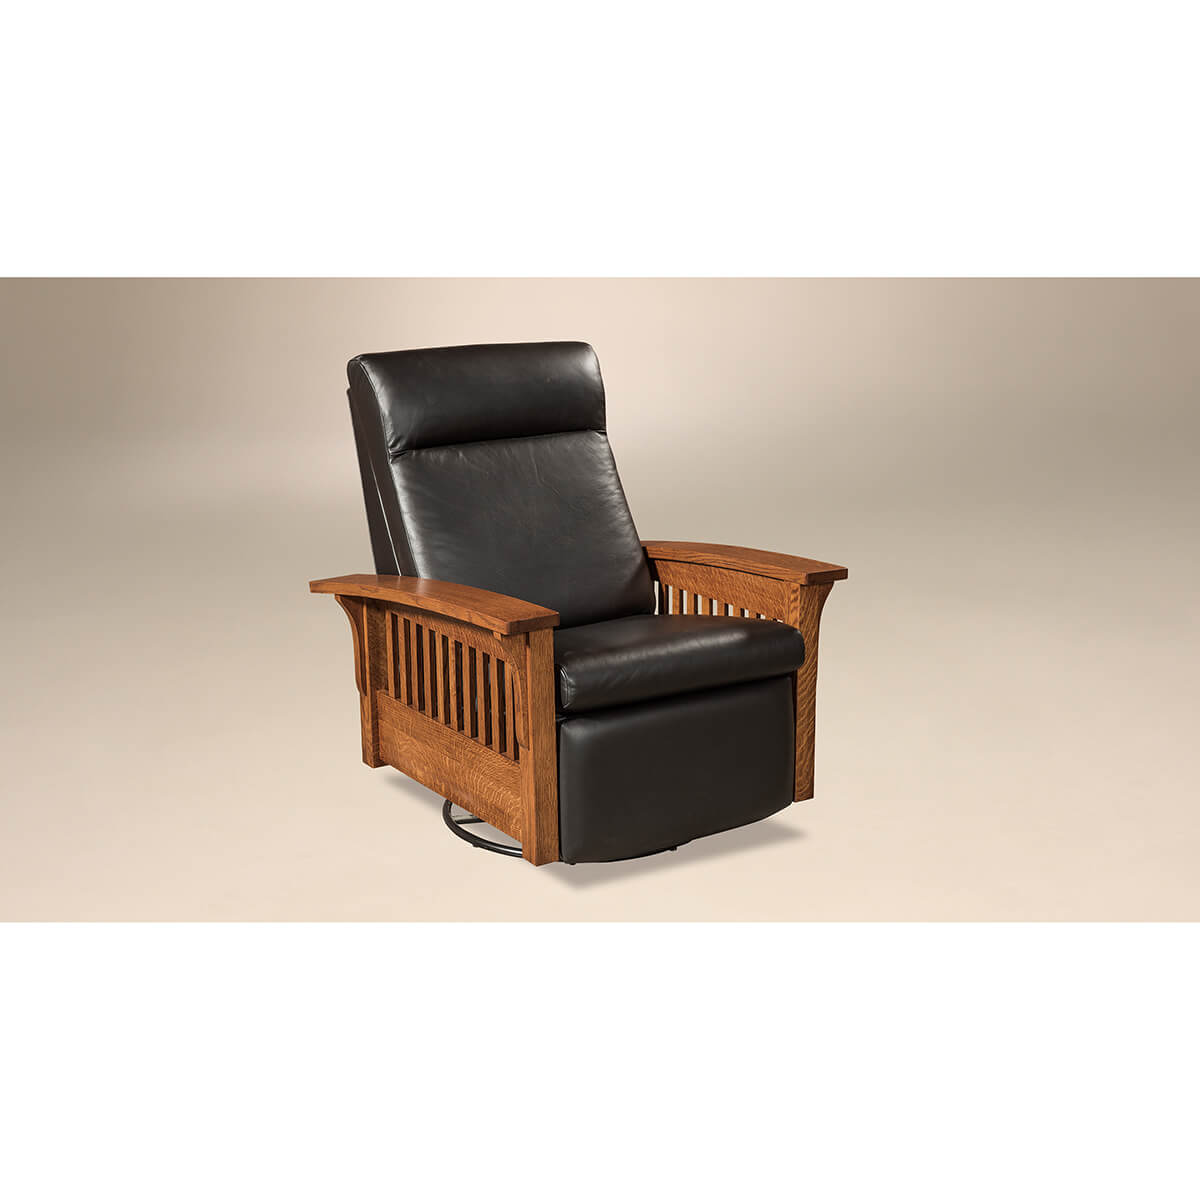 Read more about the article Hoosier Glider Recliner Swivel Chair